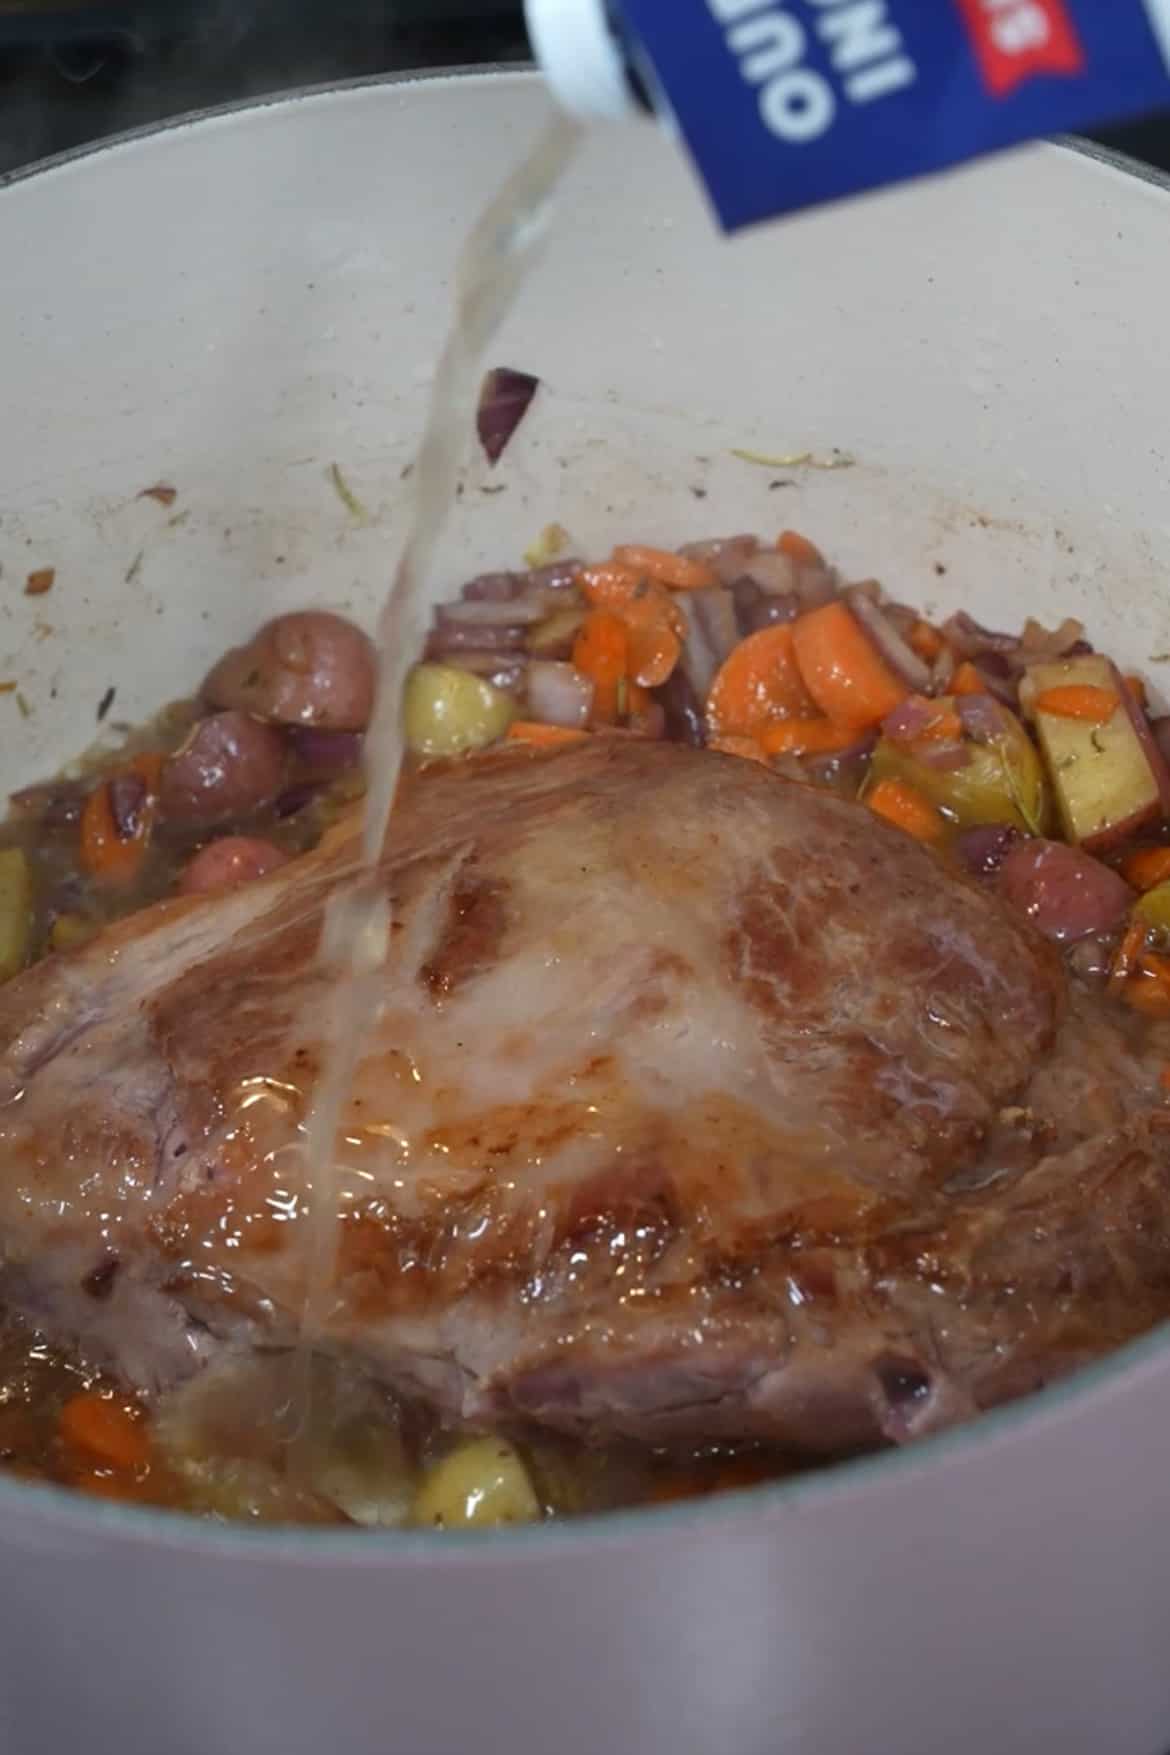 Pour in the chicken broth and red wine (if using). The liquid should come about halfway up the sides of the pork. Add the bay leaves. Cover the pot with a lid and transfer it to the preheated oven. Roast for 1.5 to 2 hours or until the pork is tender and easily pulls apart with a fork.